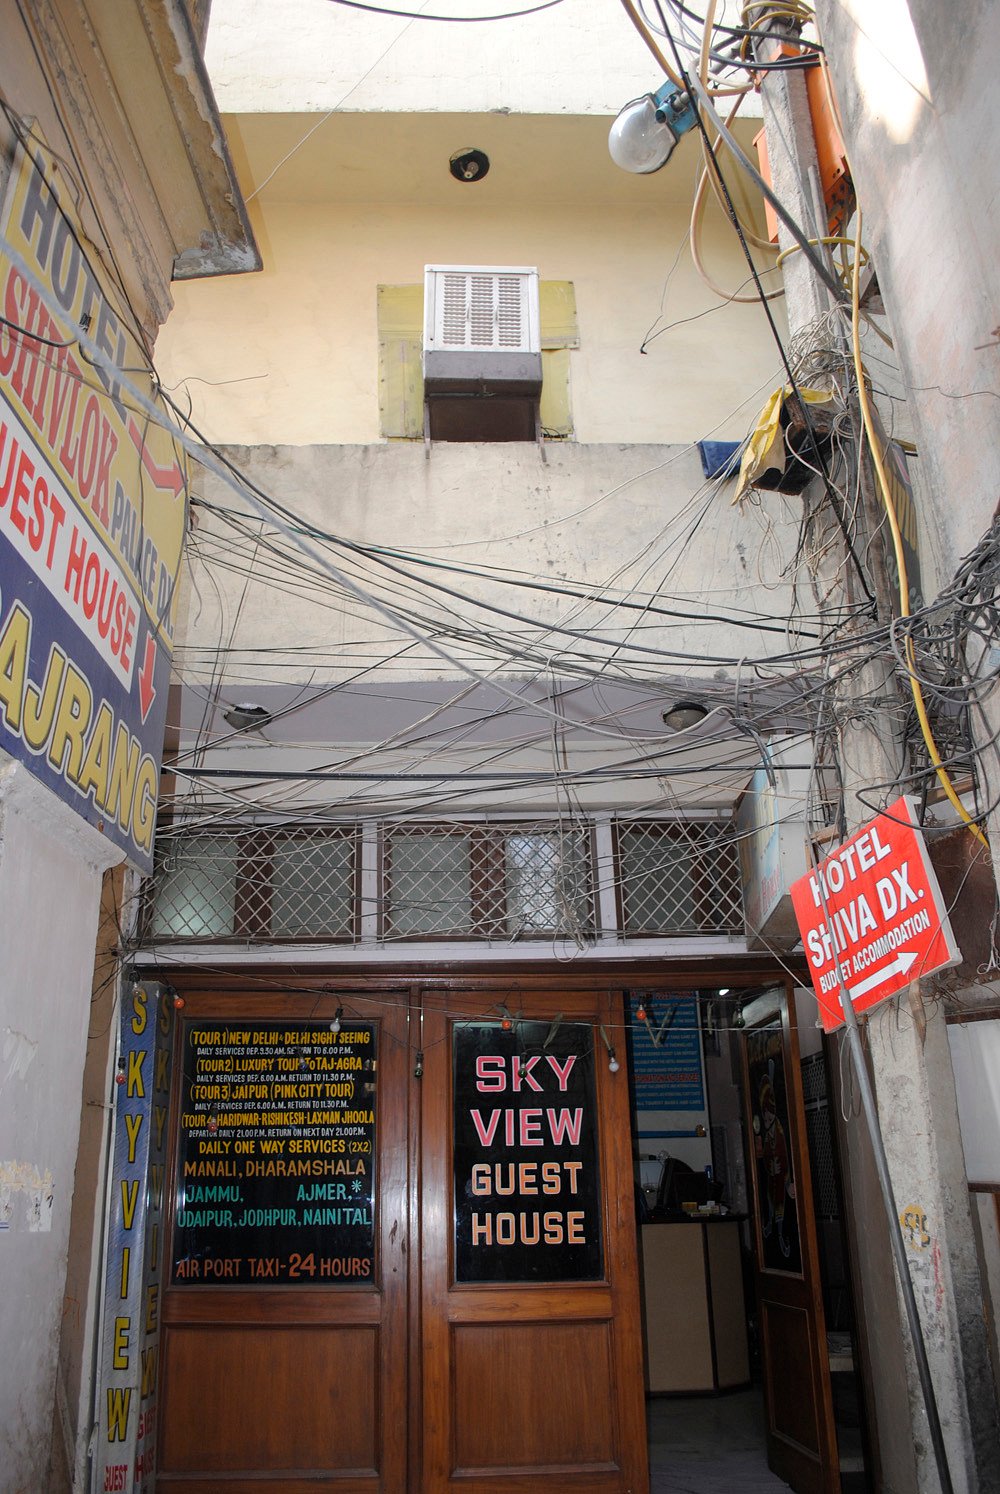 SKY VIEW GUEST HOUSE Prices & Reviews (New Delhi, India)